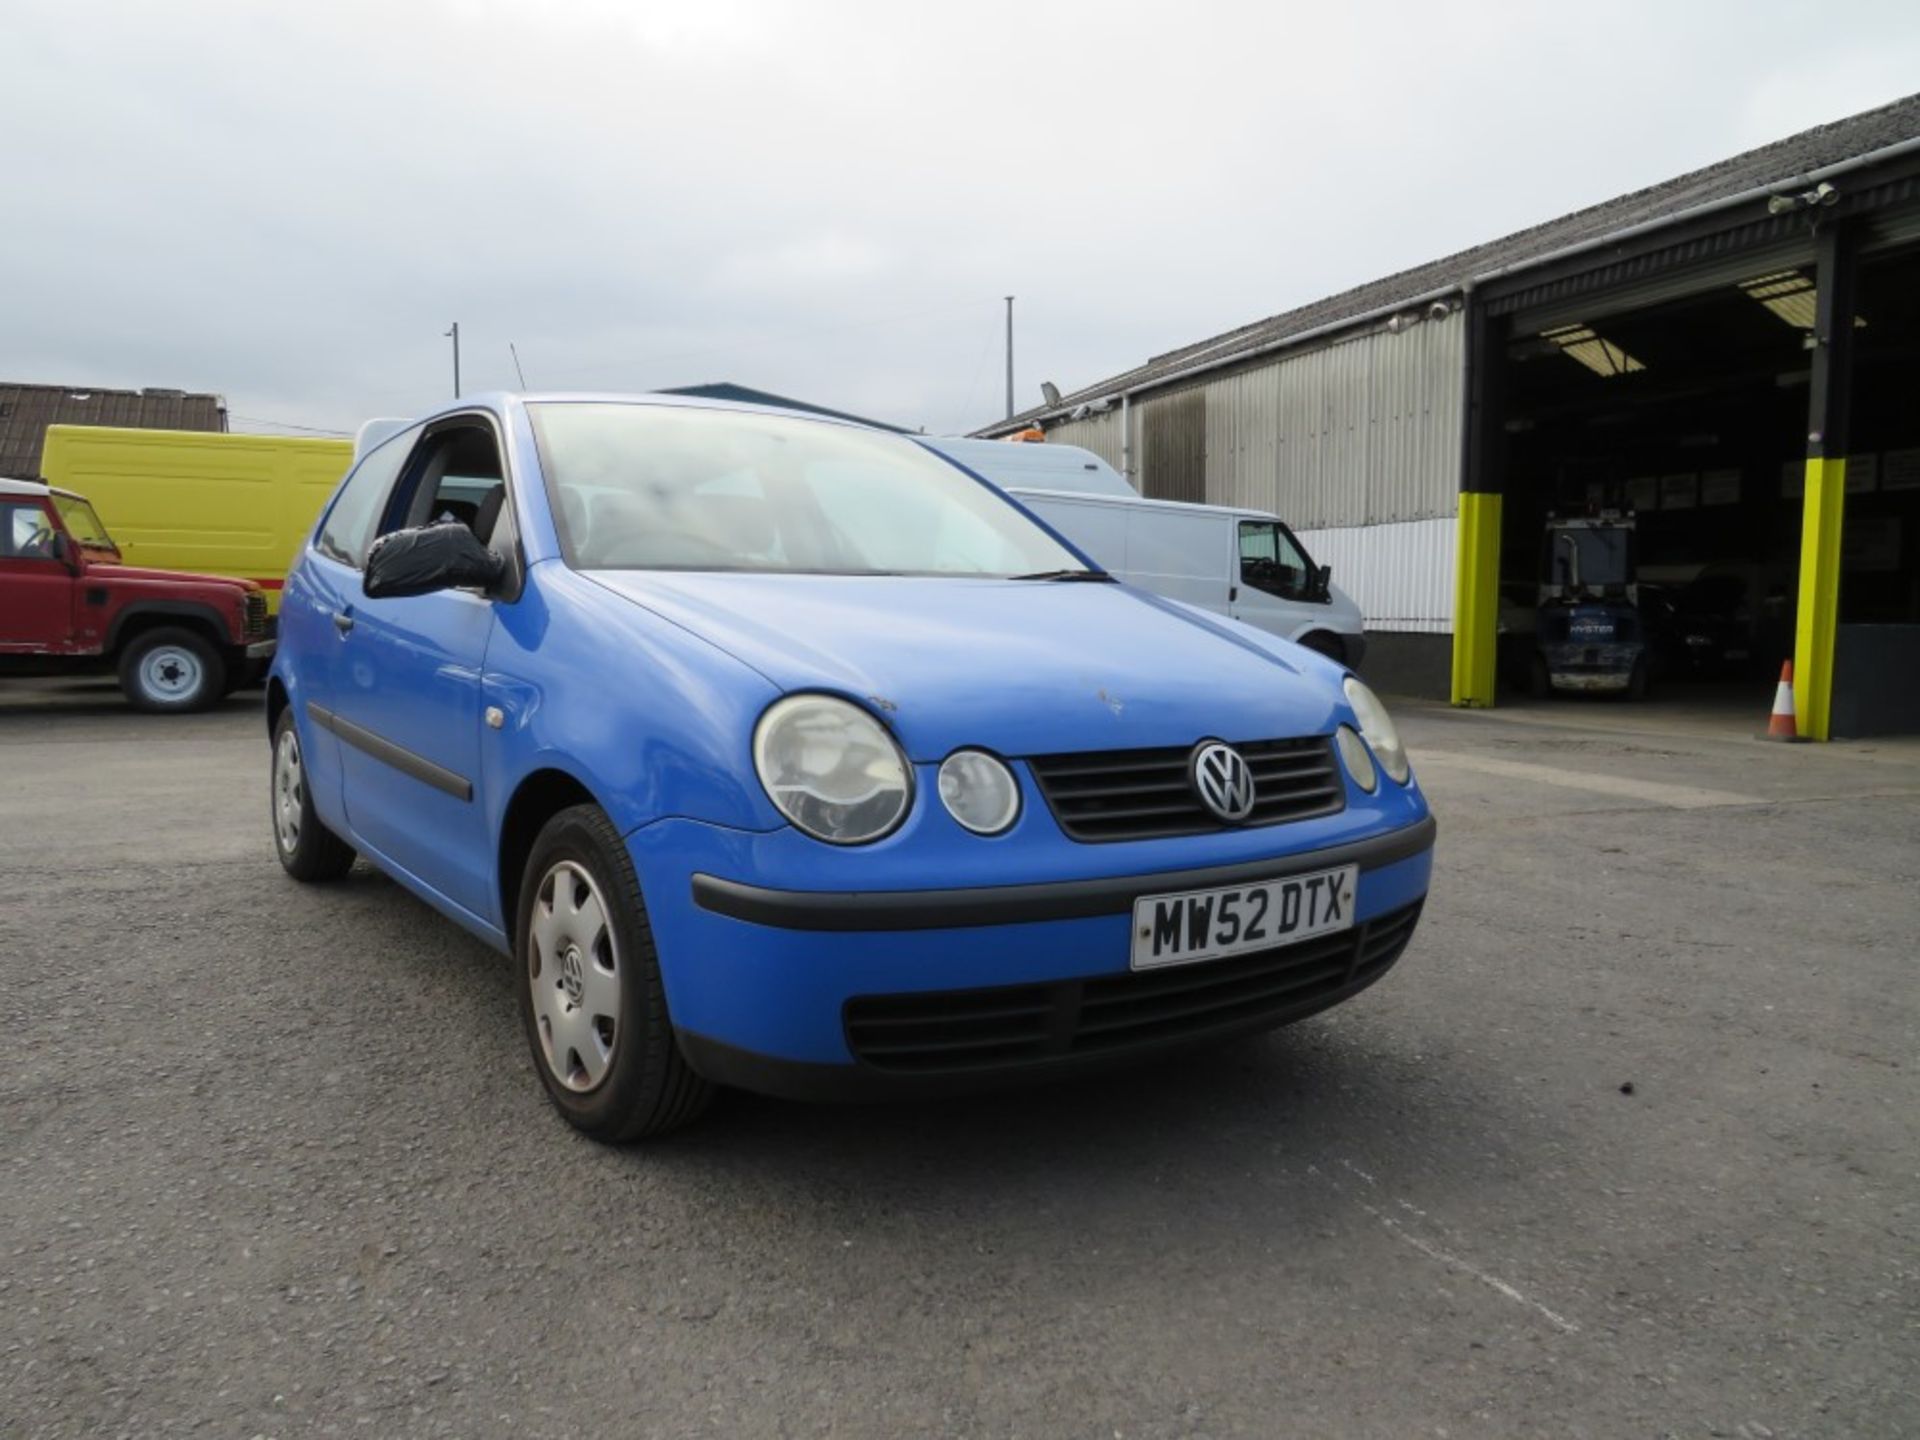 52 reg VW POLO E, 1ST REG 01/03, TEST 10/20, 118026M NOT WARRANTED, V5 HERE, 2 FORMER KEEPERS [NO